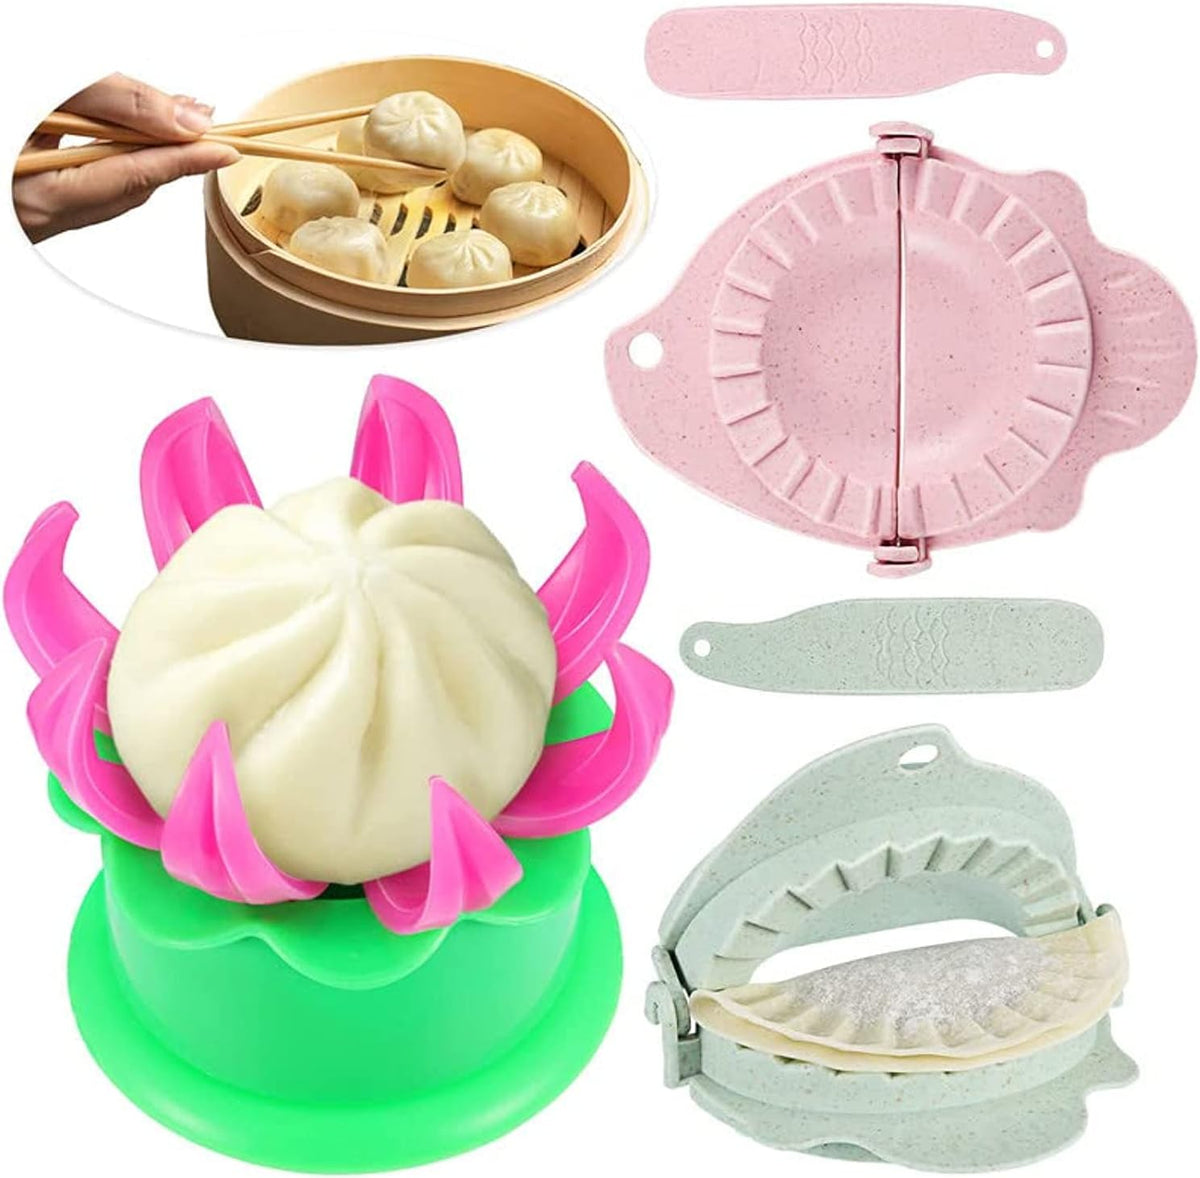 Ultimate Easy Baking Oven Bundle For Kids With 11 Items - Oven, 3 Refill  Mixes, Apron, Hat, Bowl, Spatula, Whisk, Baking Pan & Tool (Heroic Hot Pink